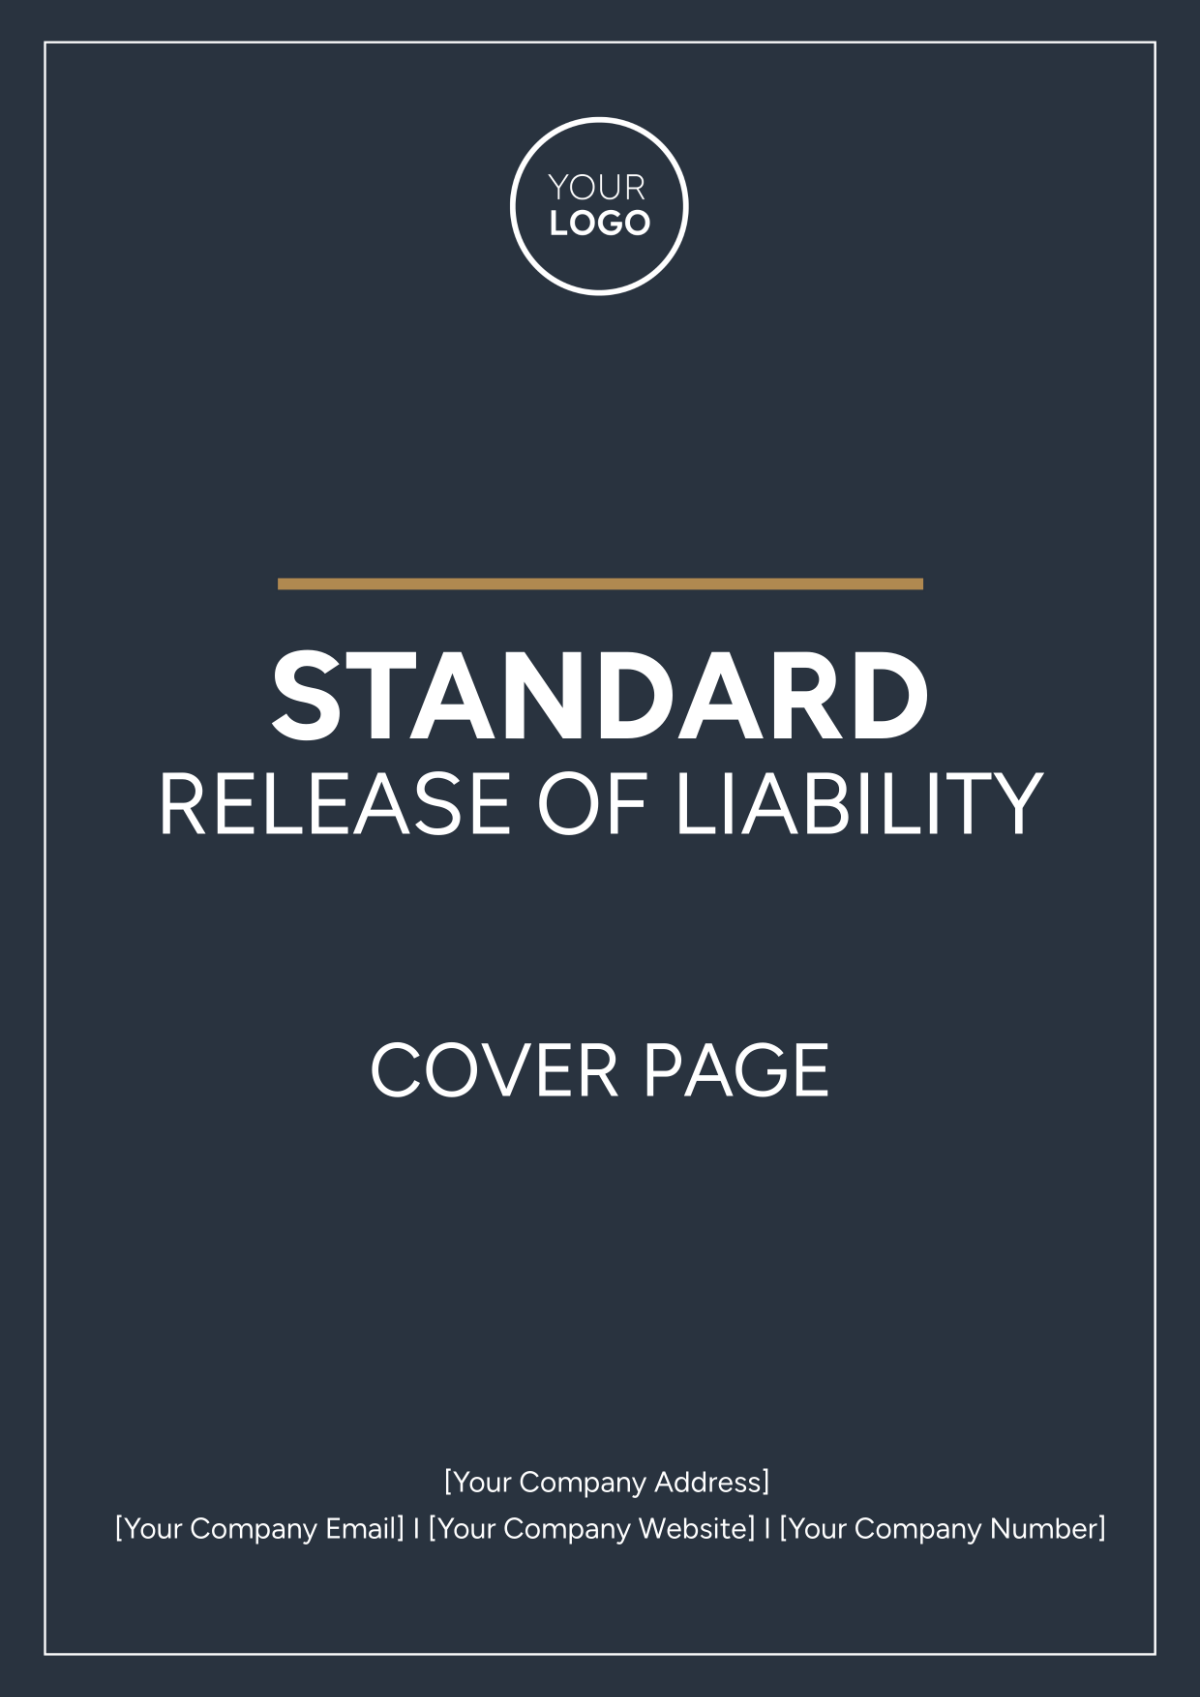 Standard Release of Liability Cover Page